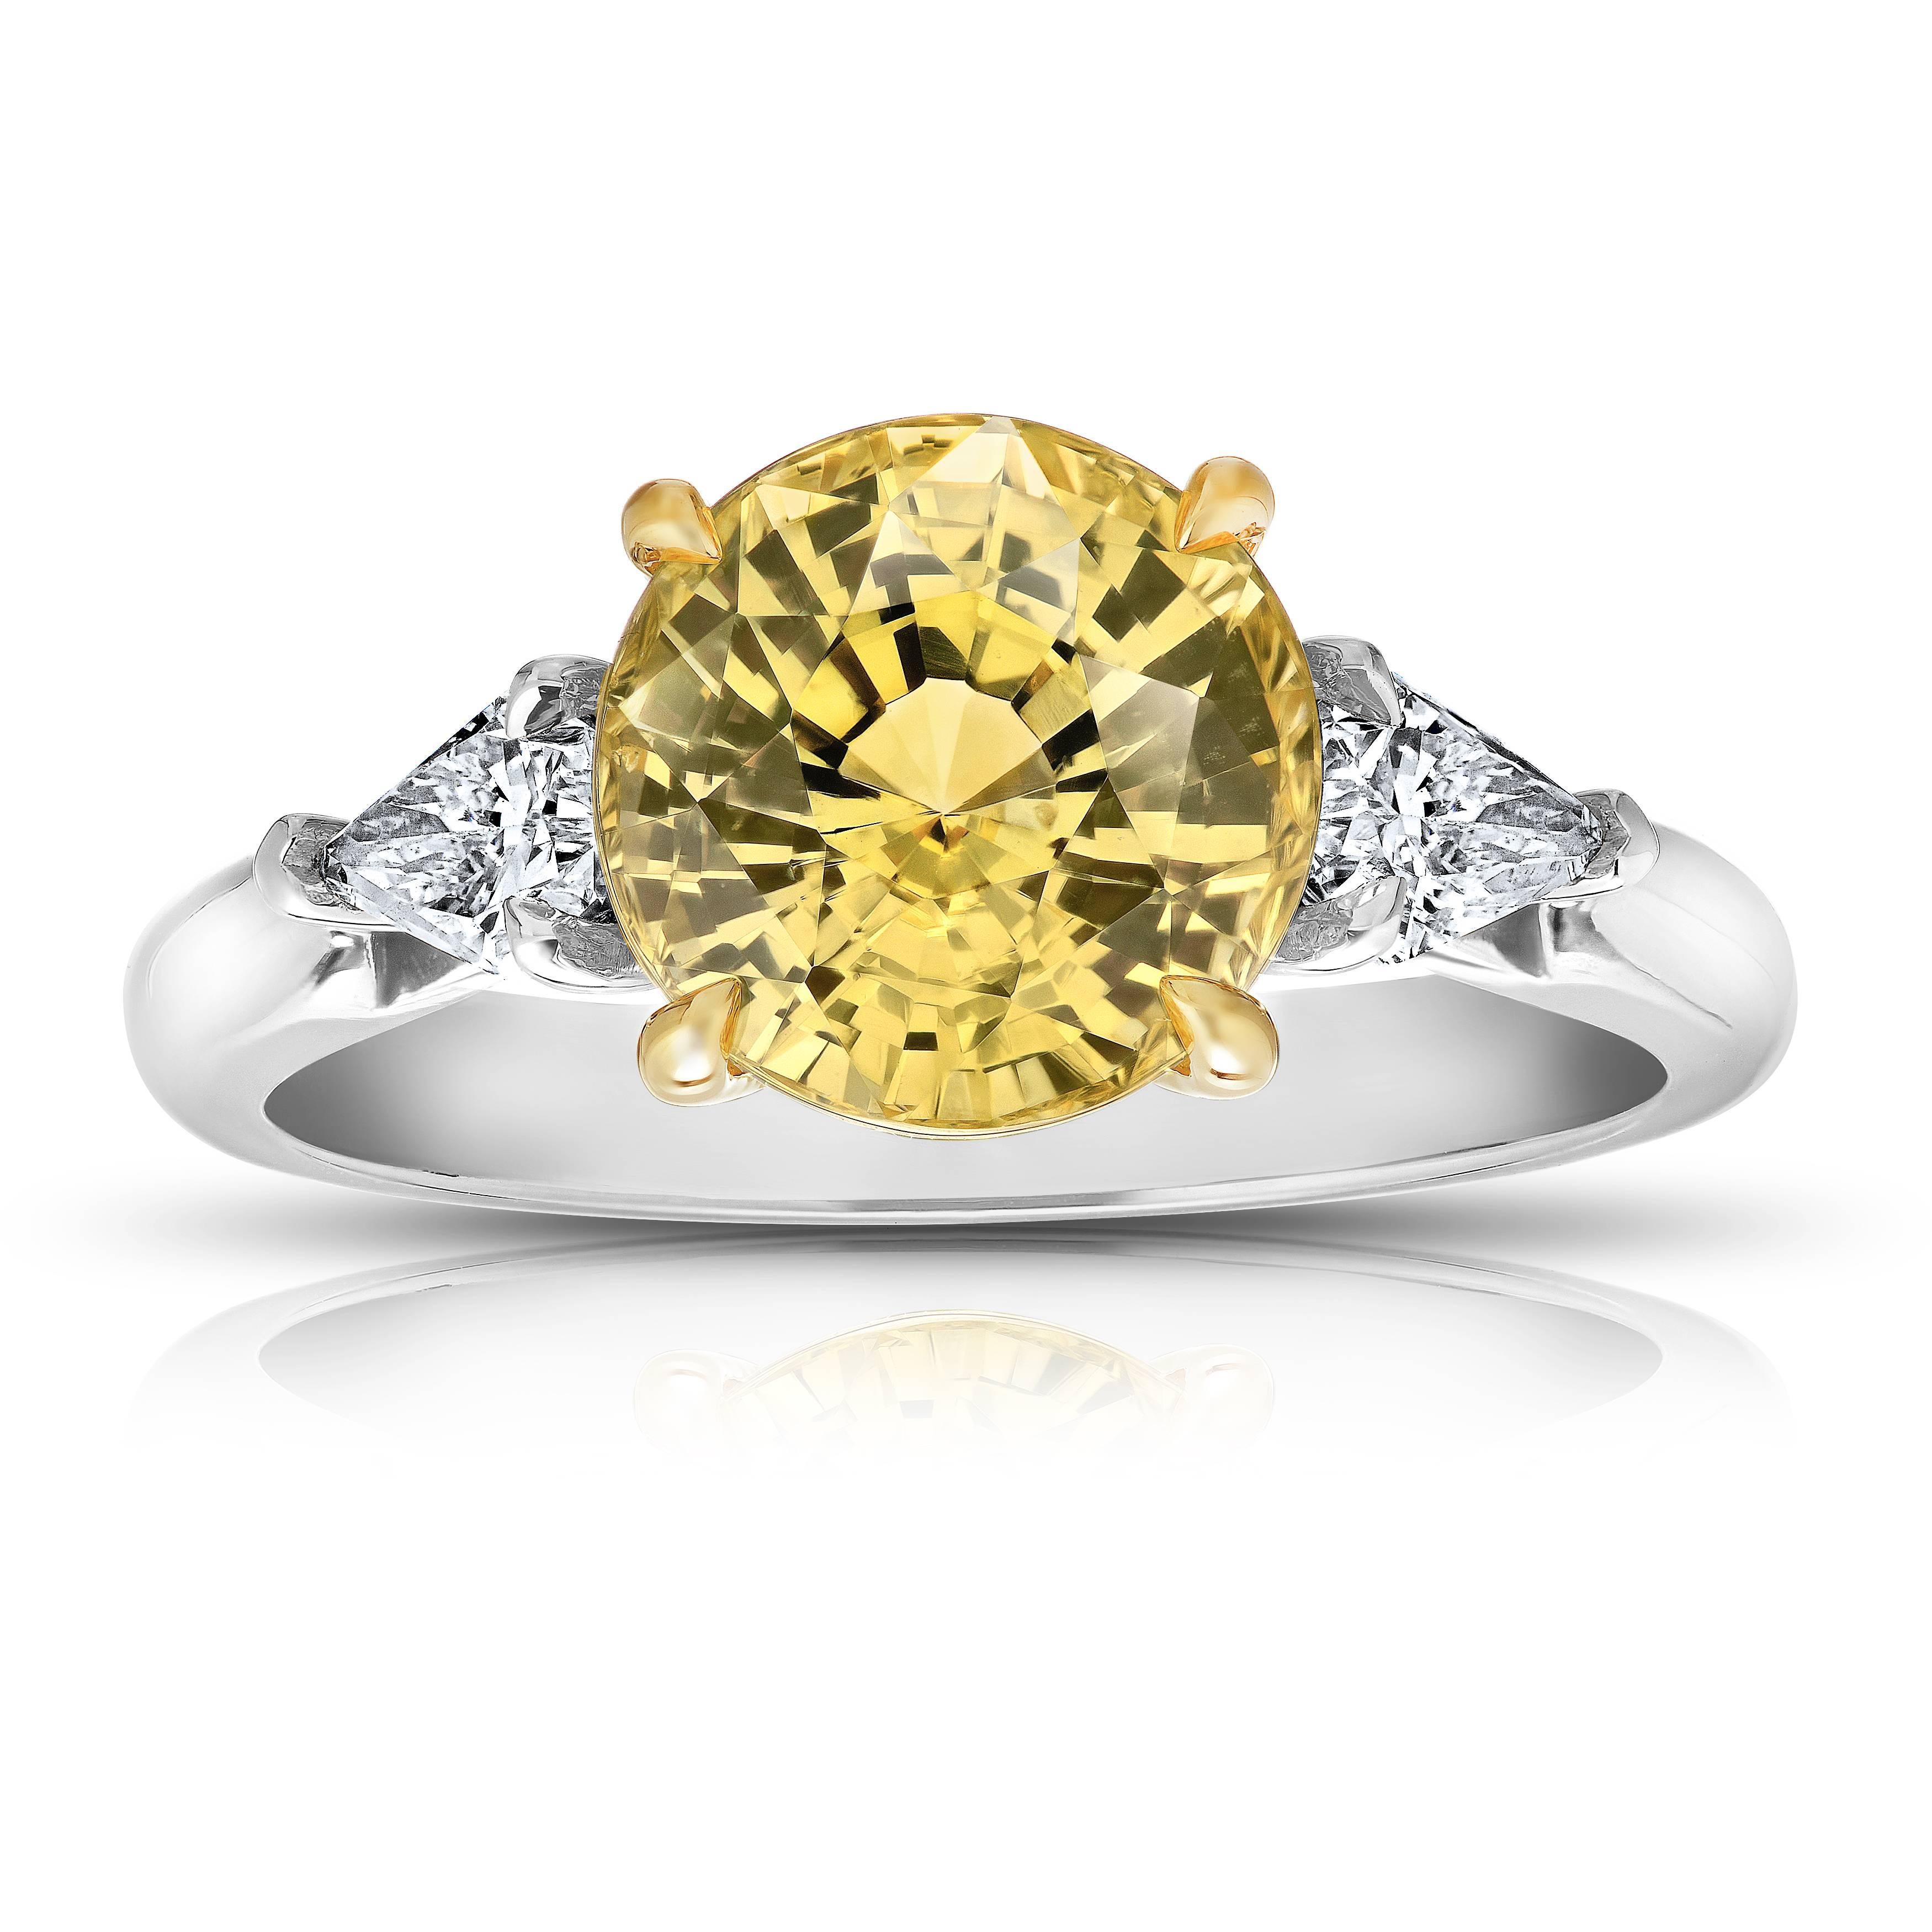 This meticulously crafted ring has a center Round (natural no heat) Yellow Sapphire weighing 4.55 carats with two  shield cut diamonds (F+ VS1+) weighing  .60 carats. All set in platinum and 18k yellow gold basket.
The center stone is total clean